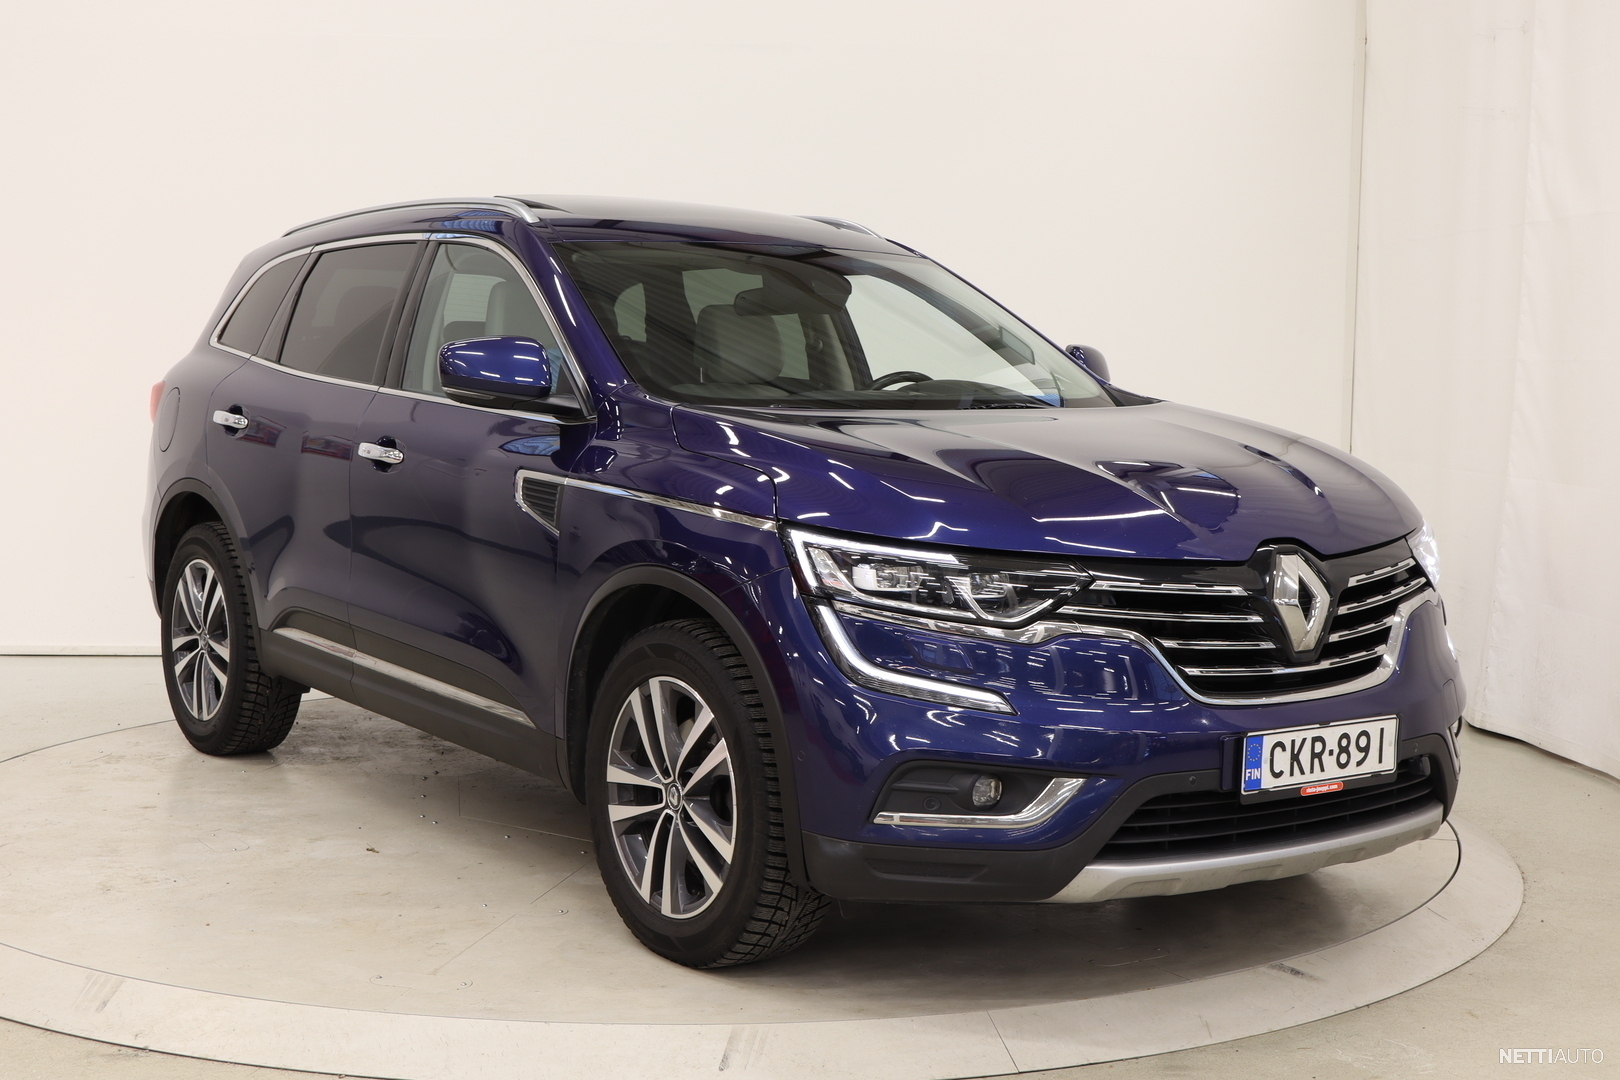 RENAULT KOLEOS 2.0 dCi 175ch energy Intens 4x4 X-Tronic occasion - suv -  automatique - 58 079 km - TROYES (10000)